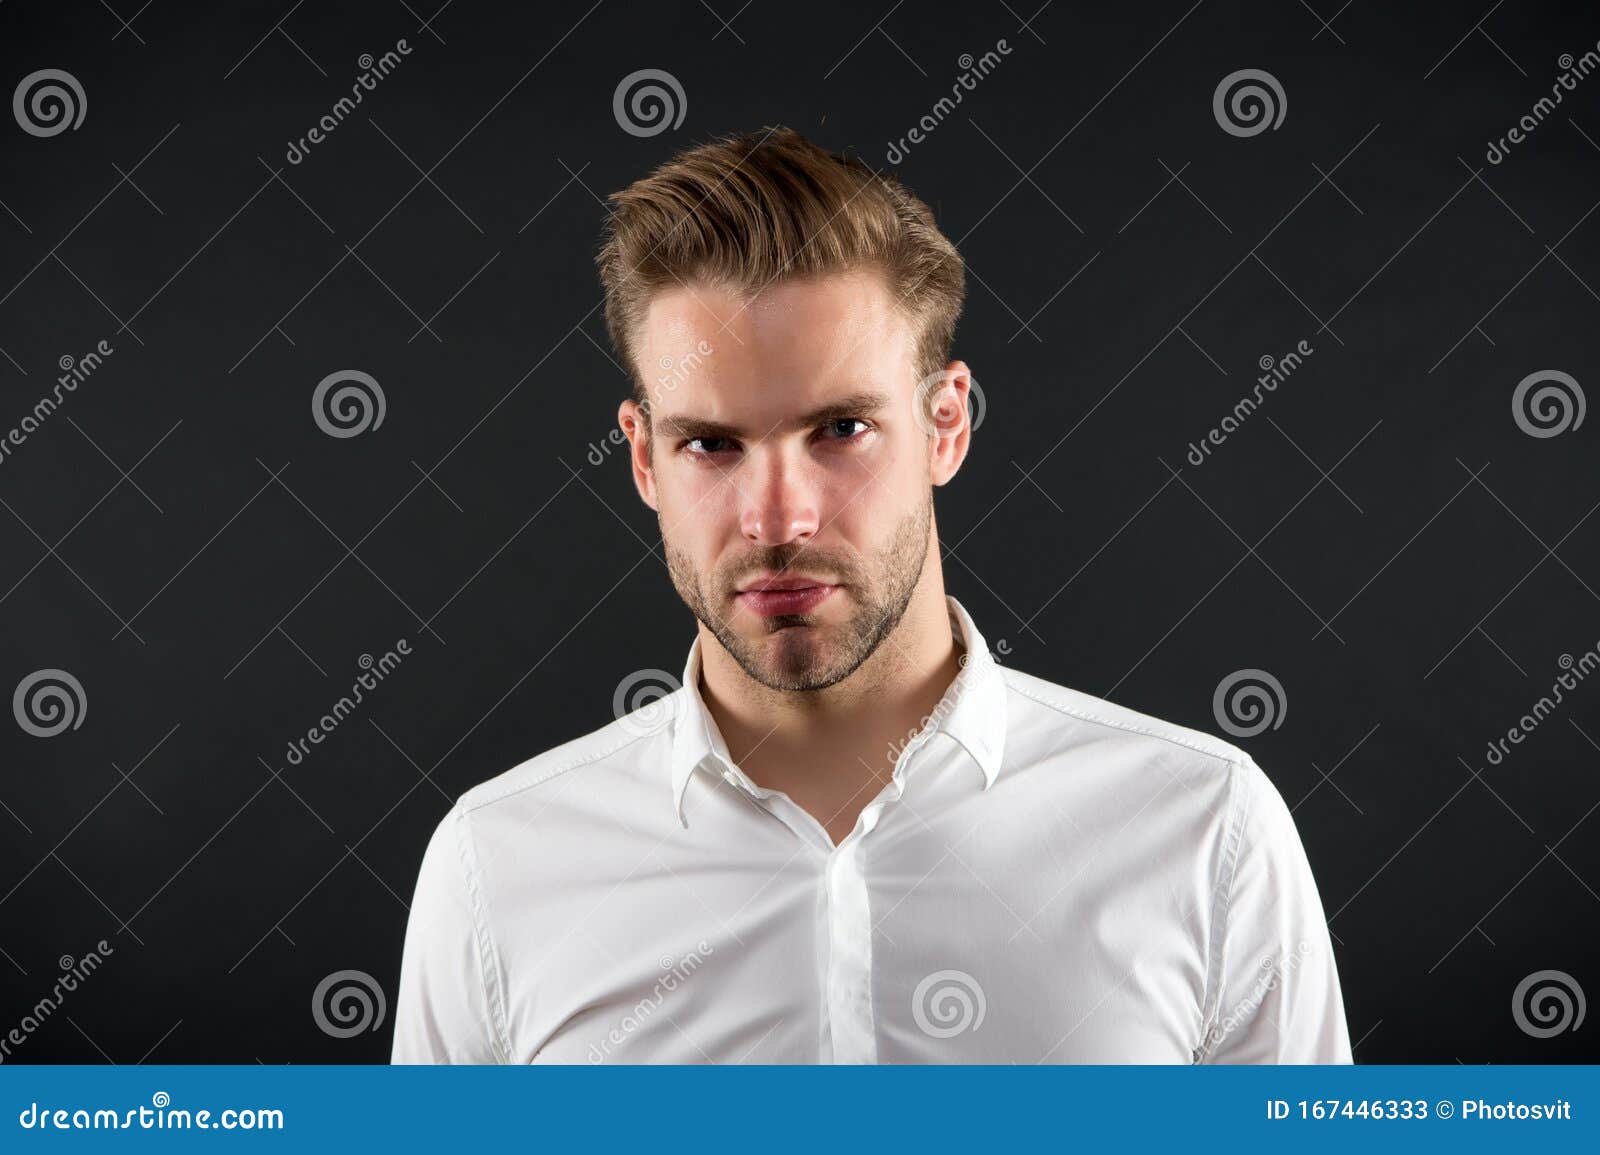 Hair Style that Suits His Face. Handsome Man with Blond Hair. Young Guy  with Stylish Beard and Mustache Hair Stock Image - Image of barber,  hairstyle: 167446333